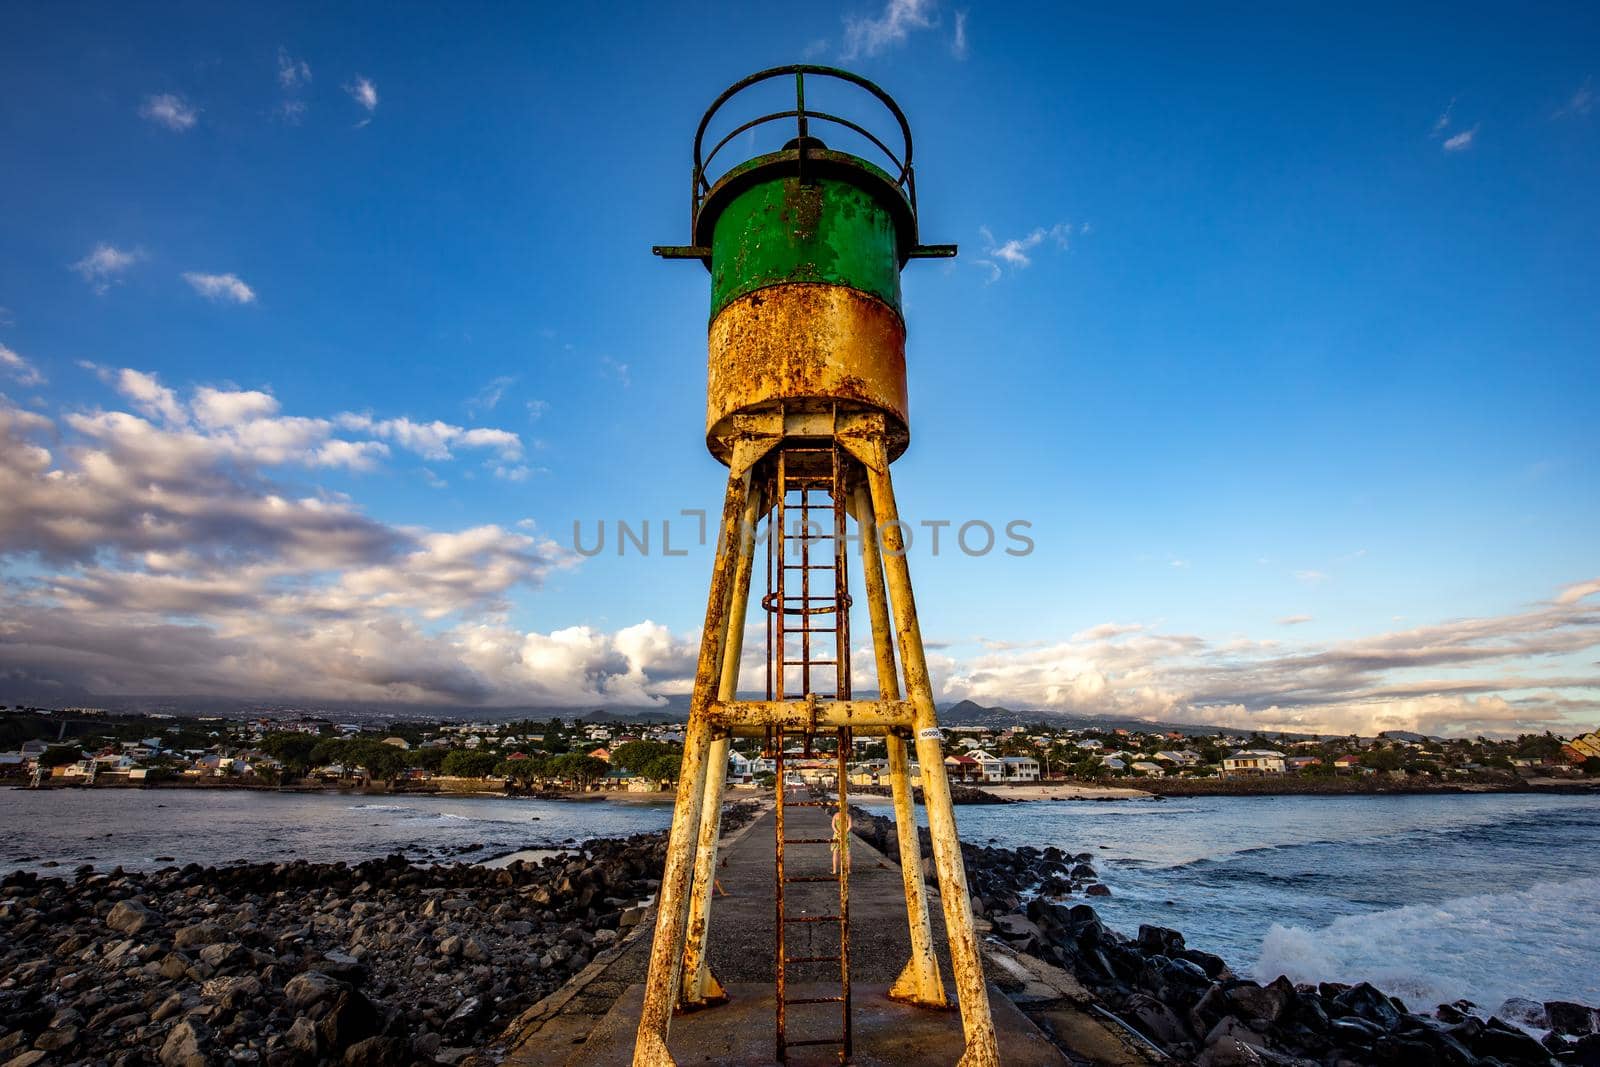 Jetty and lighthouse in Saint-Pierre, La Reunion island by photogolfer